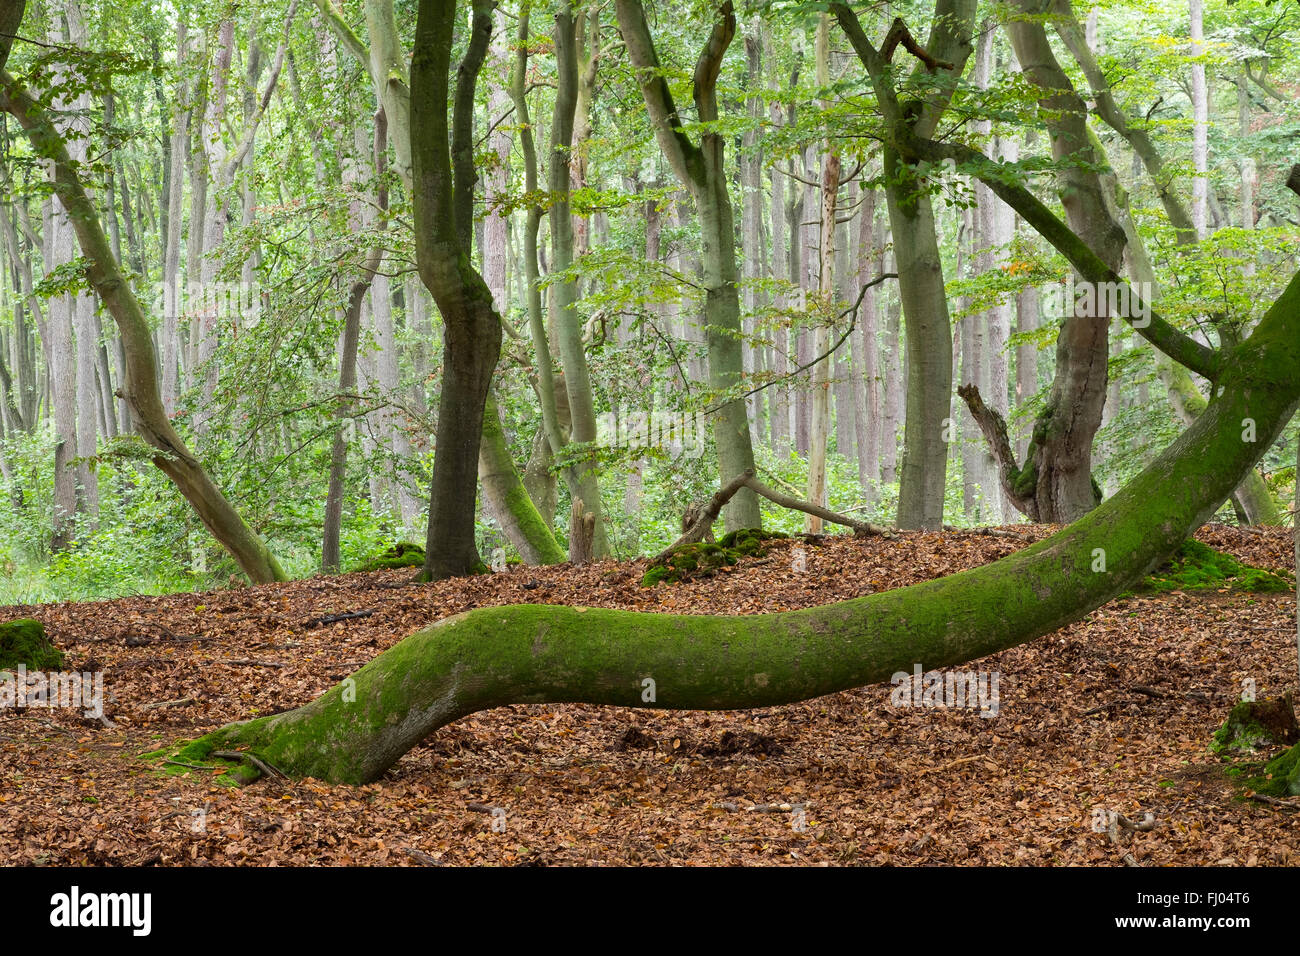 Germany, Western Pomerania Lagoon Area National Park, trees in forest, Darsser Wald Stock Photo